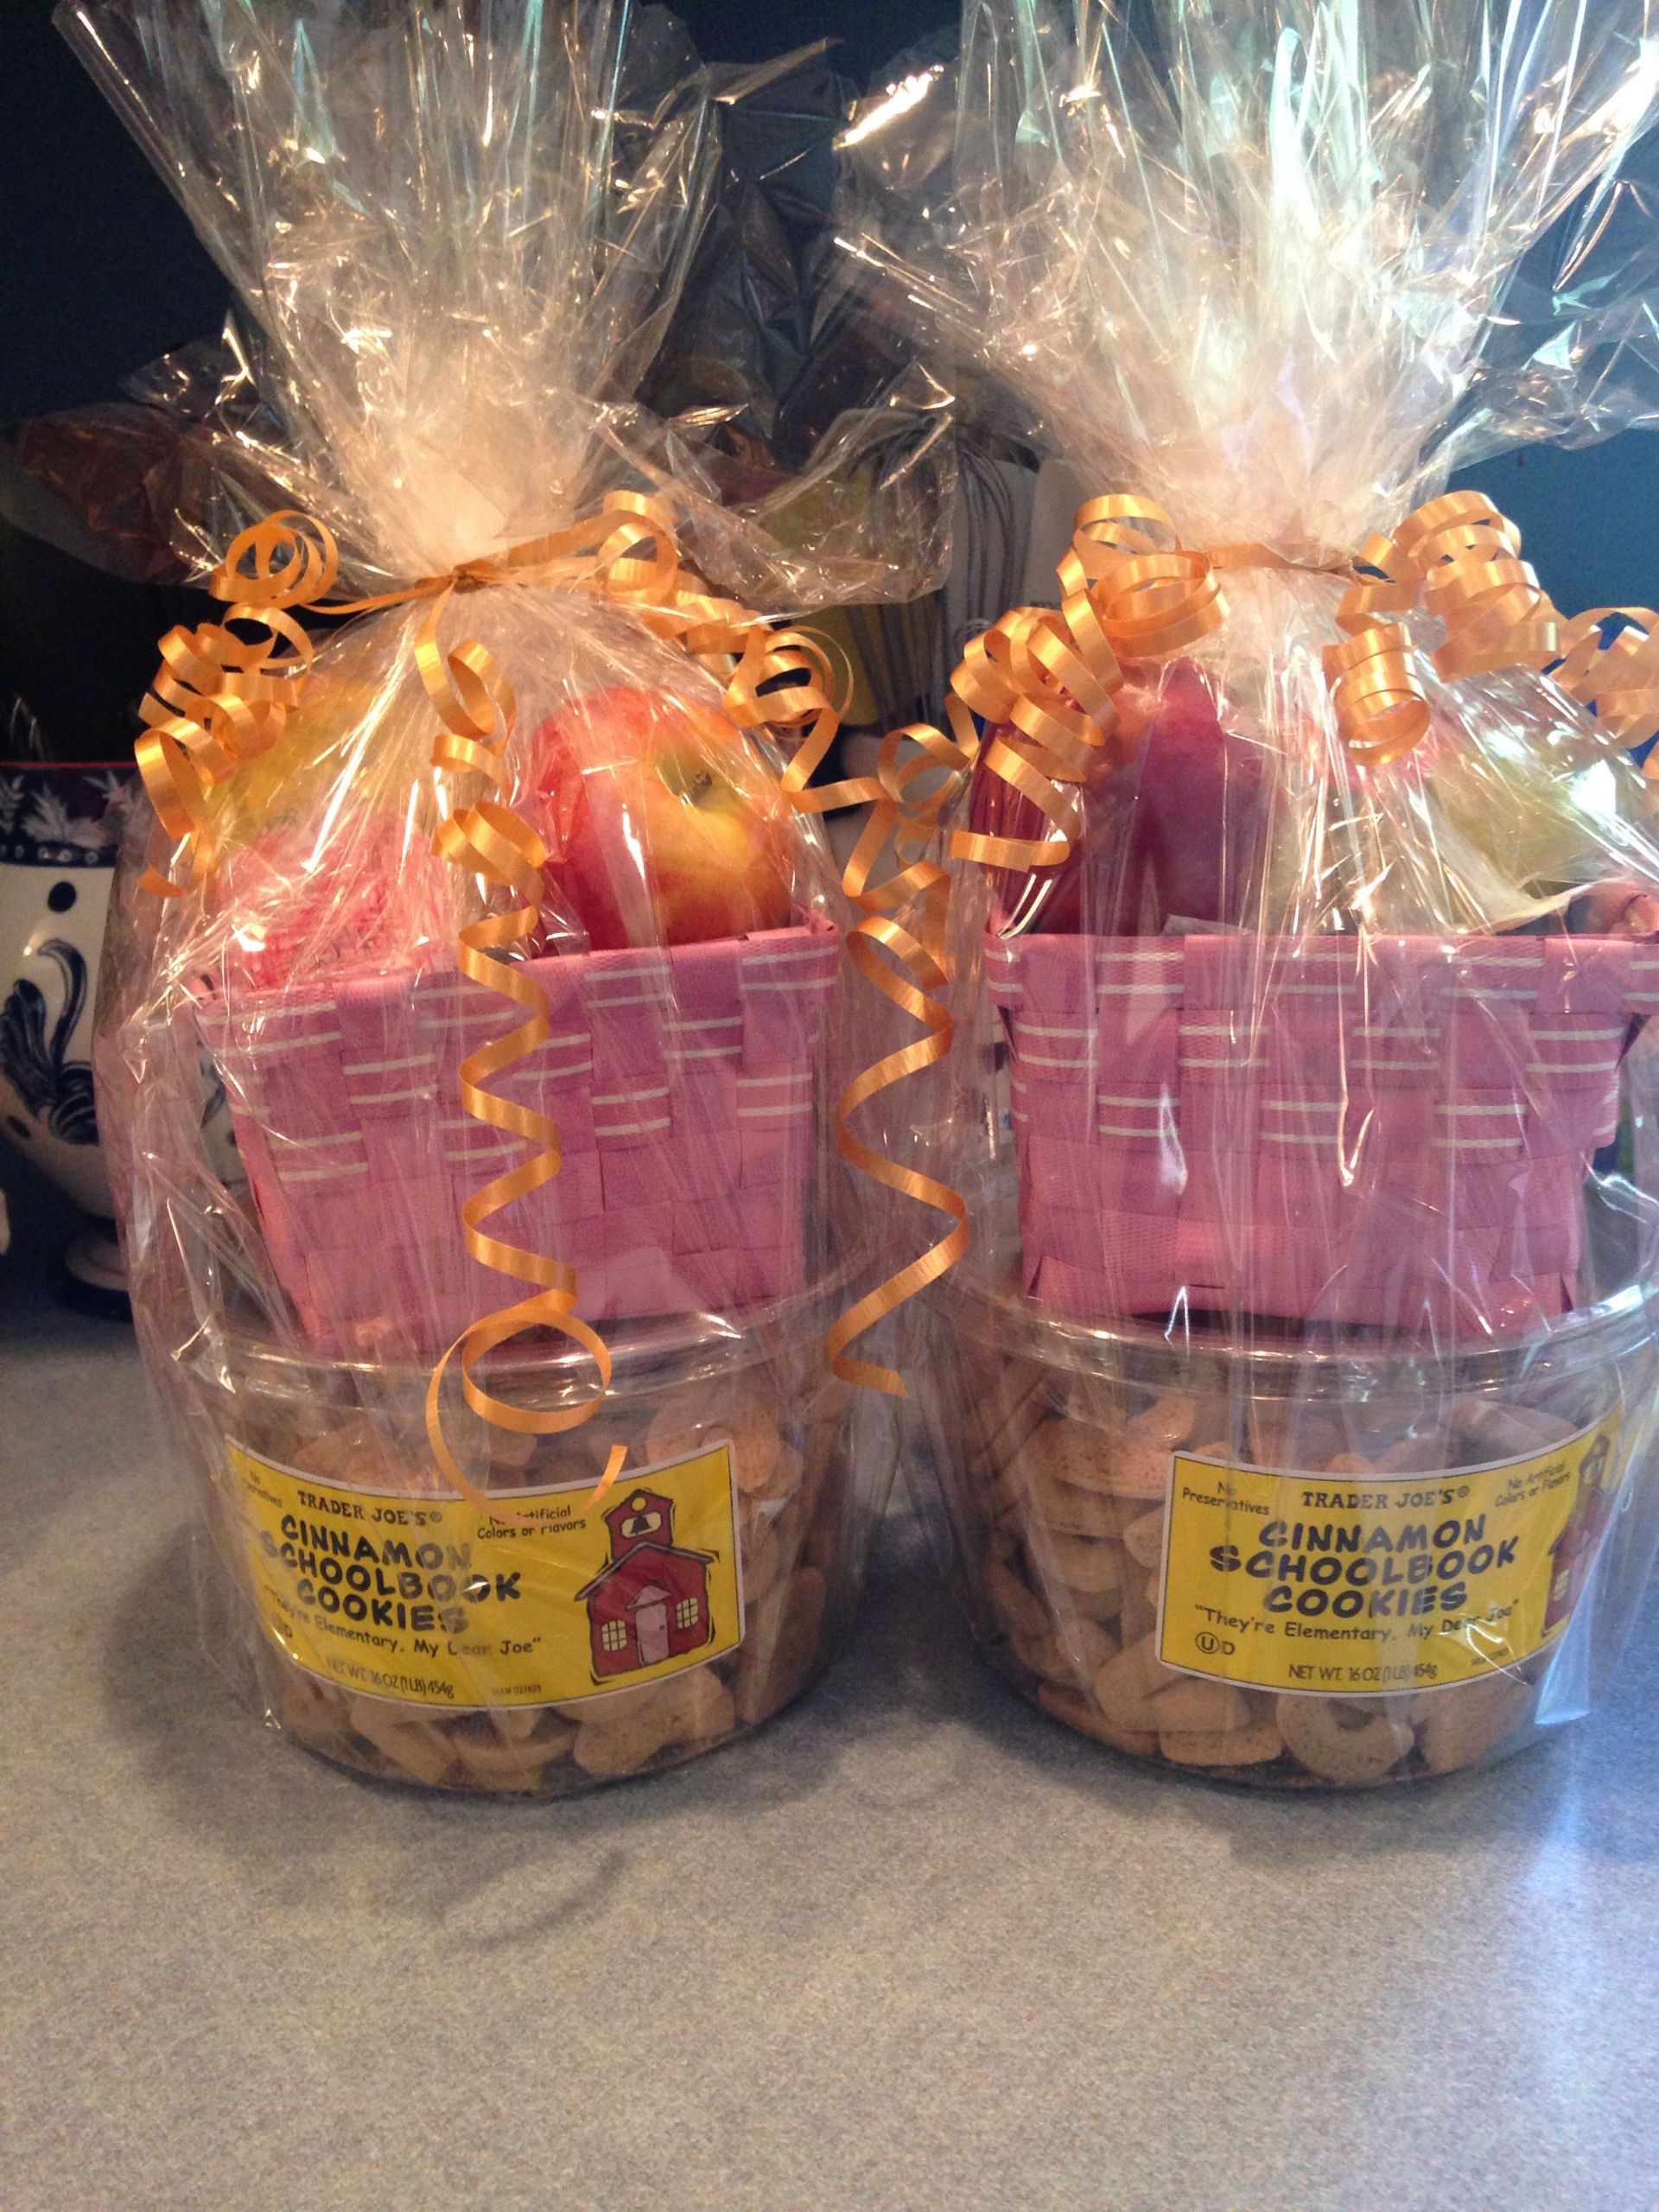 Trader Joe'S Gift Basket Ideas
 Schoolbook cookies from Trader Joes topped with a basket